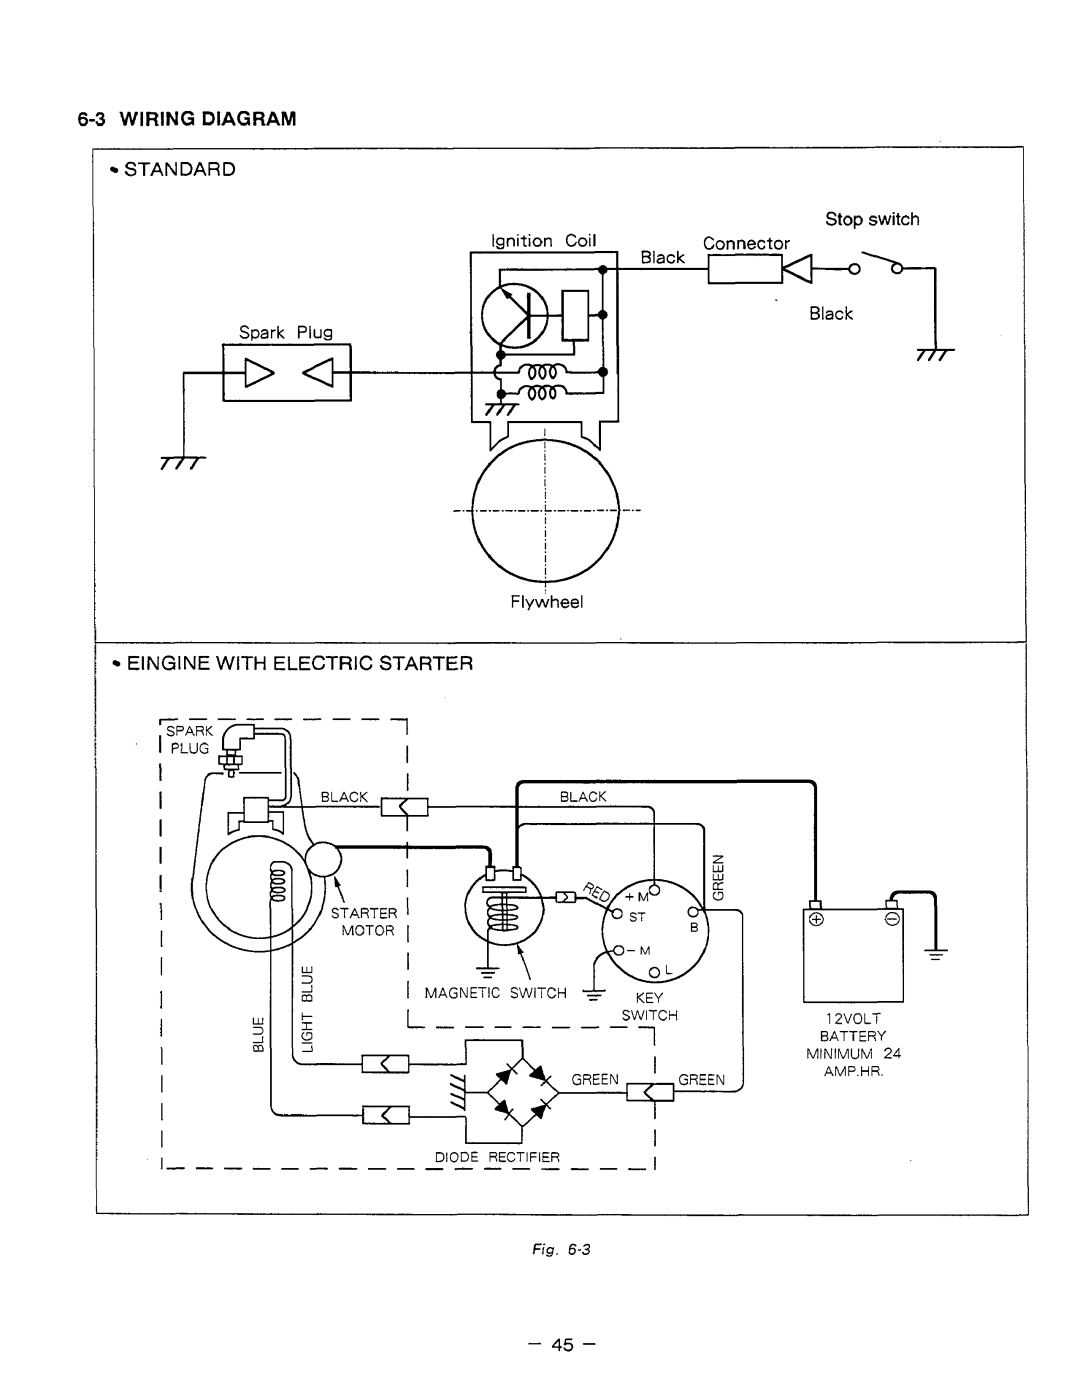 Subaru Robin Power Products EH12-2, EH17-2, EH25-2 Wiring Diagram, Standard, ElNGlNE WITH ELECTRIC STARTER, Stop switch 